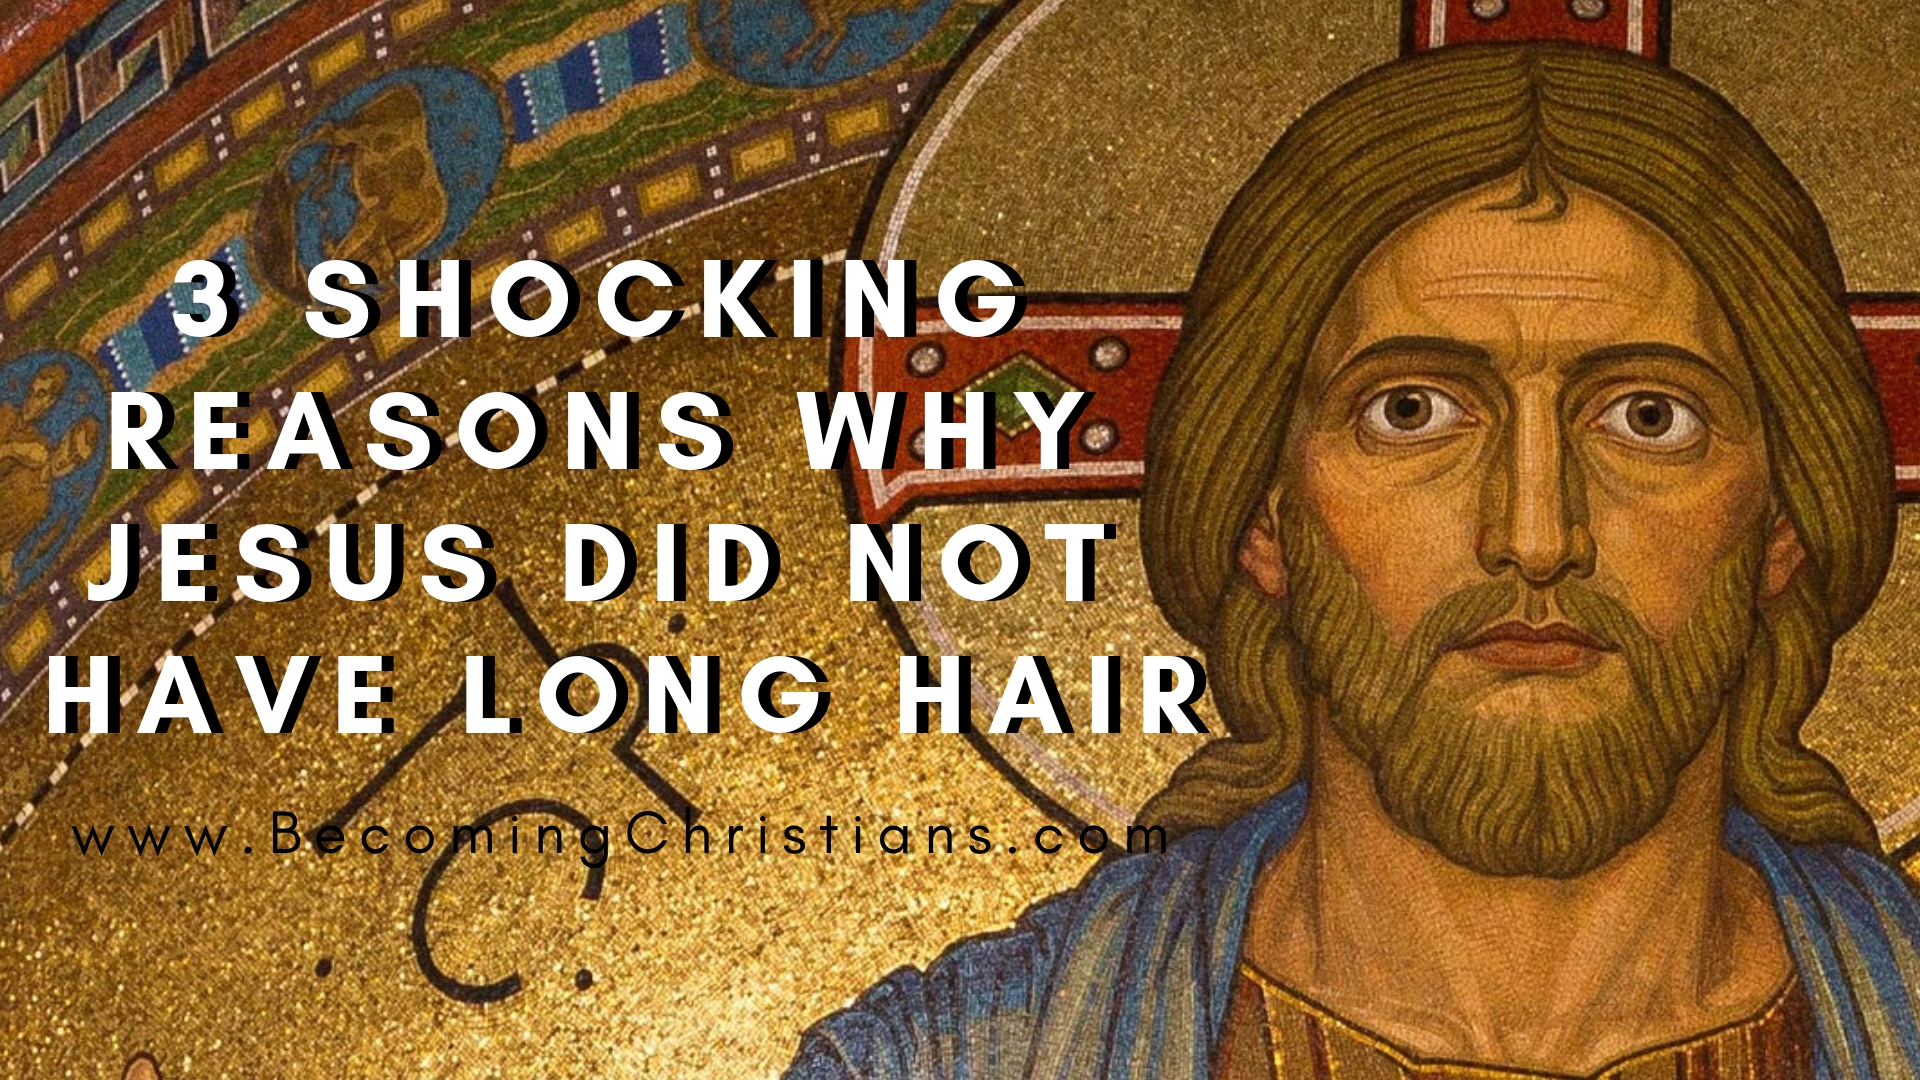 3 Shocking Reasons Why Jesus Did Not Have Long Hair